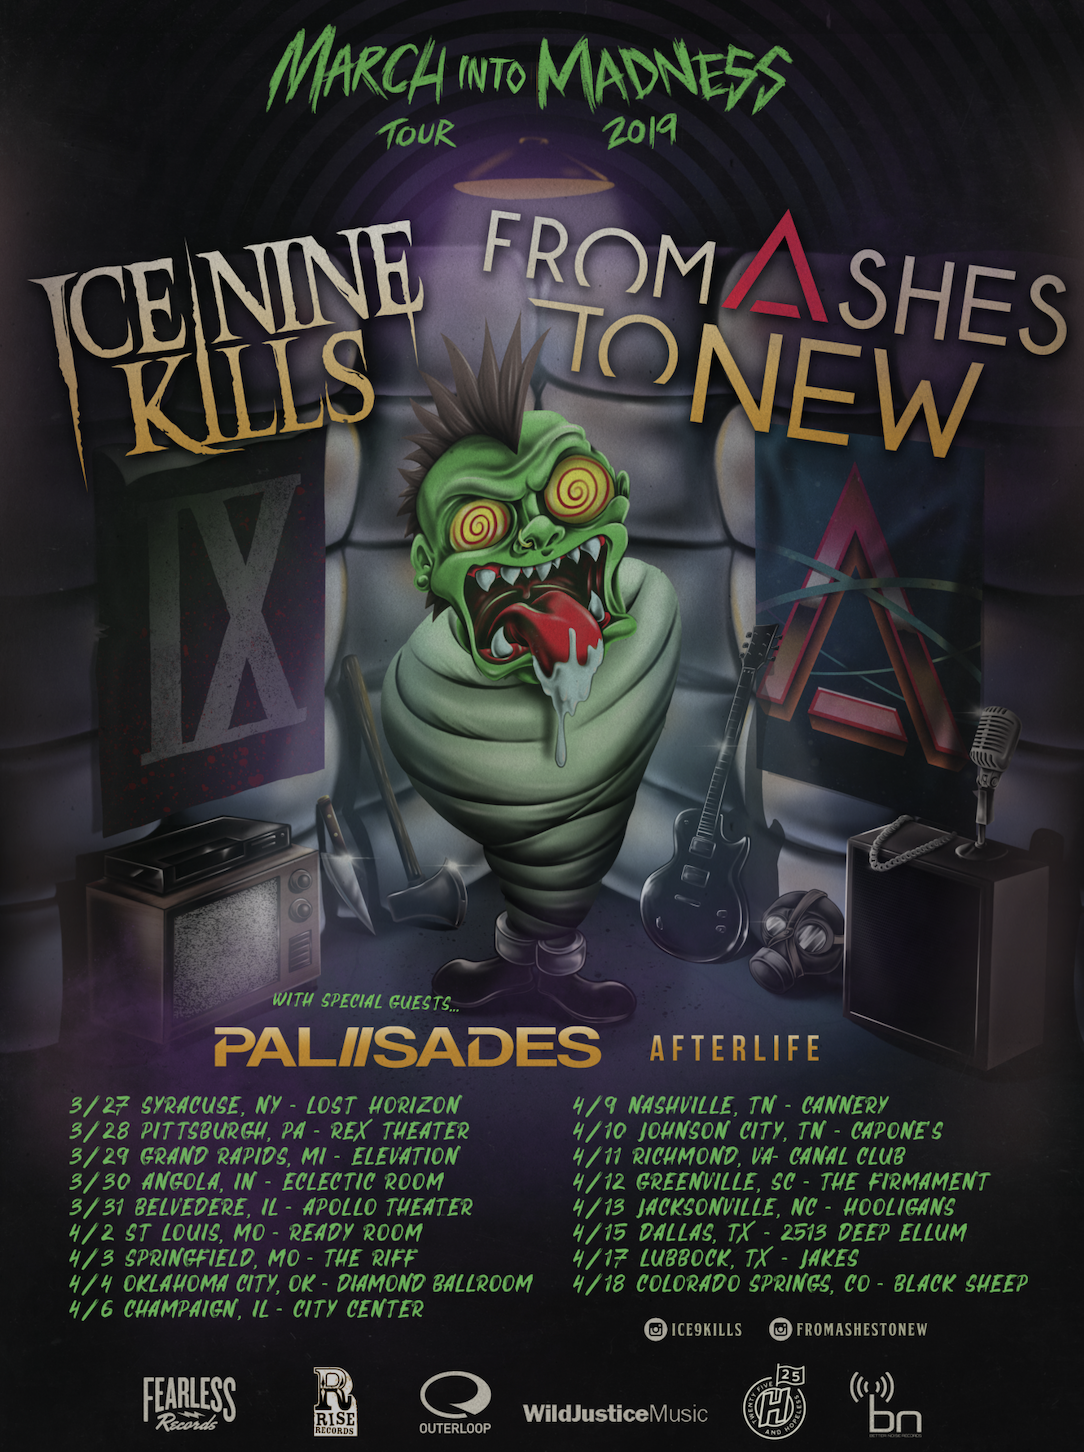 Ice Nine Kills Announce Co-Headline Tour With From Ashes To New